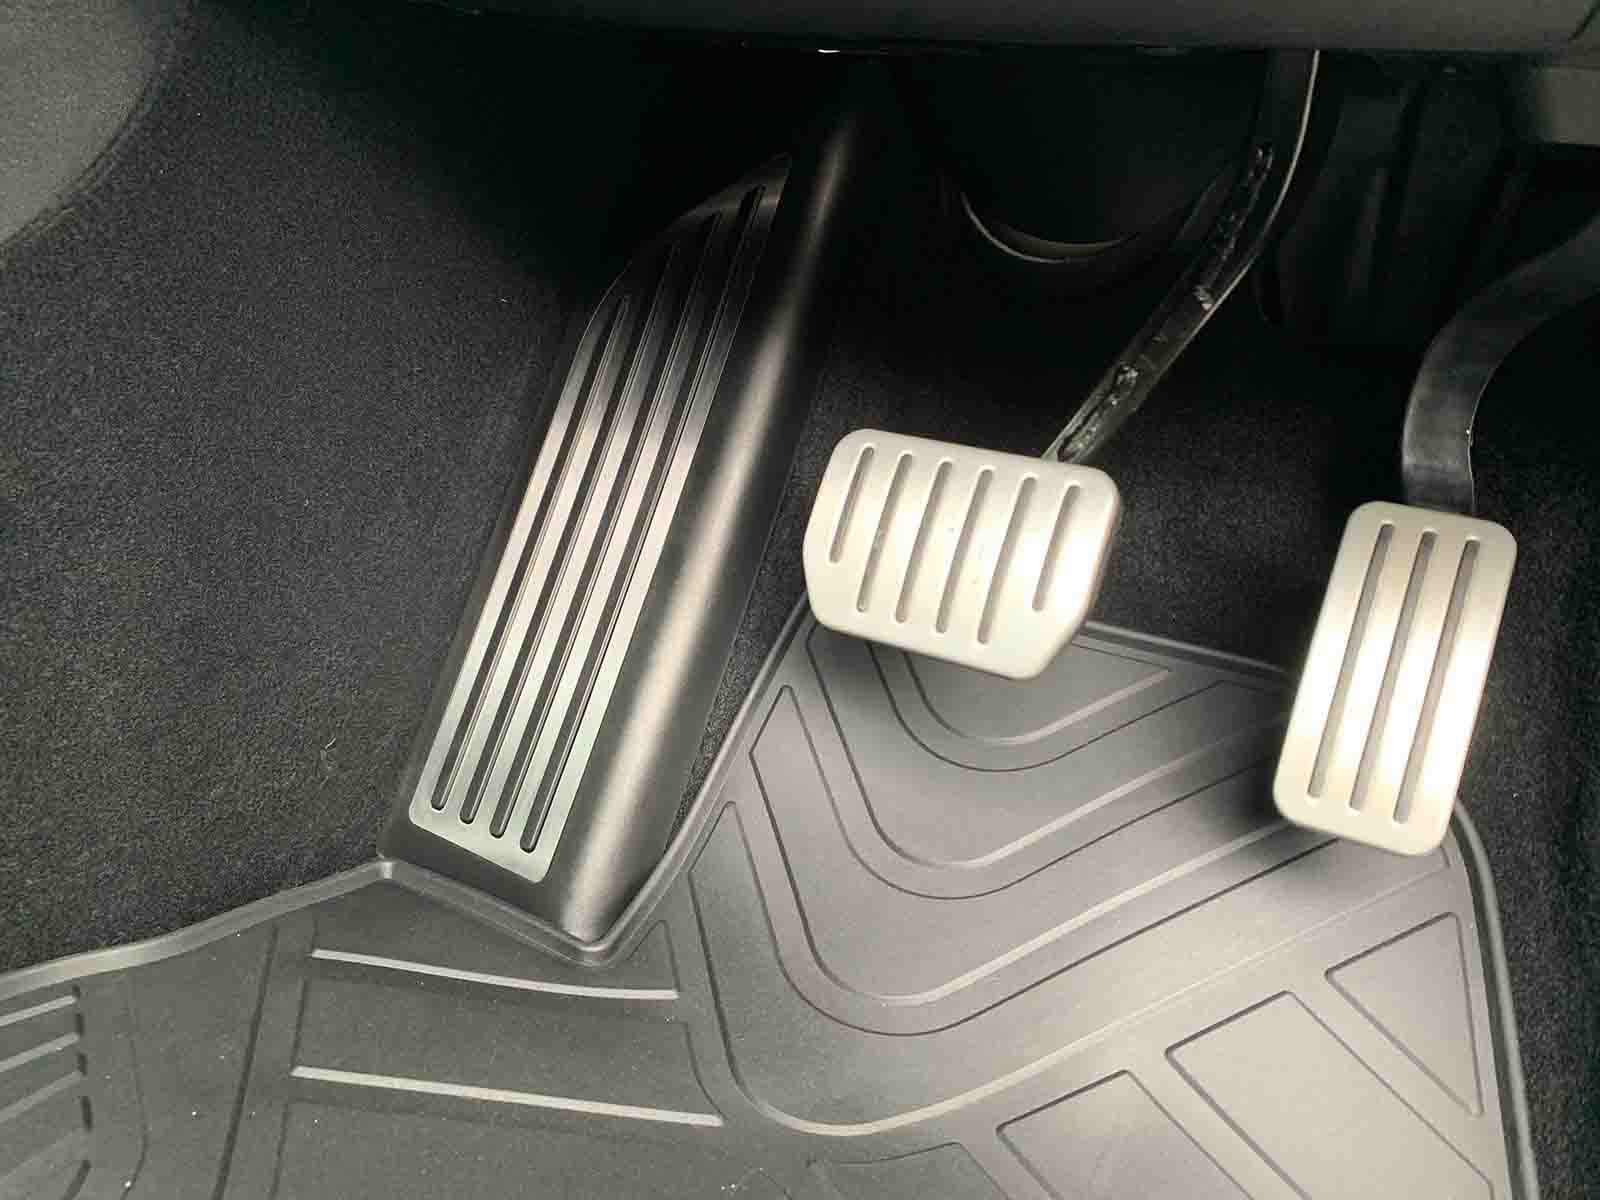 https://www.plugear.com/wp-content/uploads/2021/01/rhd-uk-only-model-3-all-weather-interior-floor-mats-3-pcs-synthetic-latex-rubber-530090.jpg